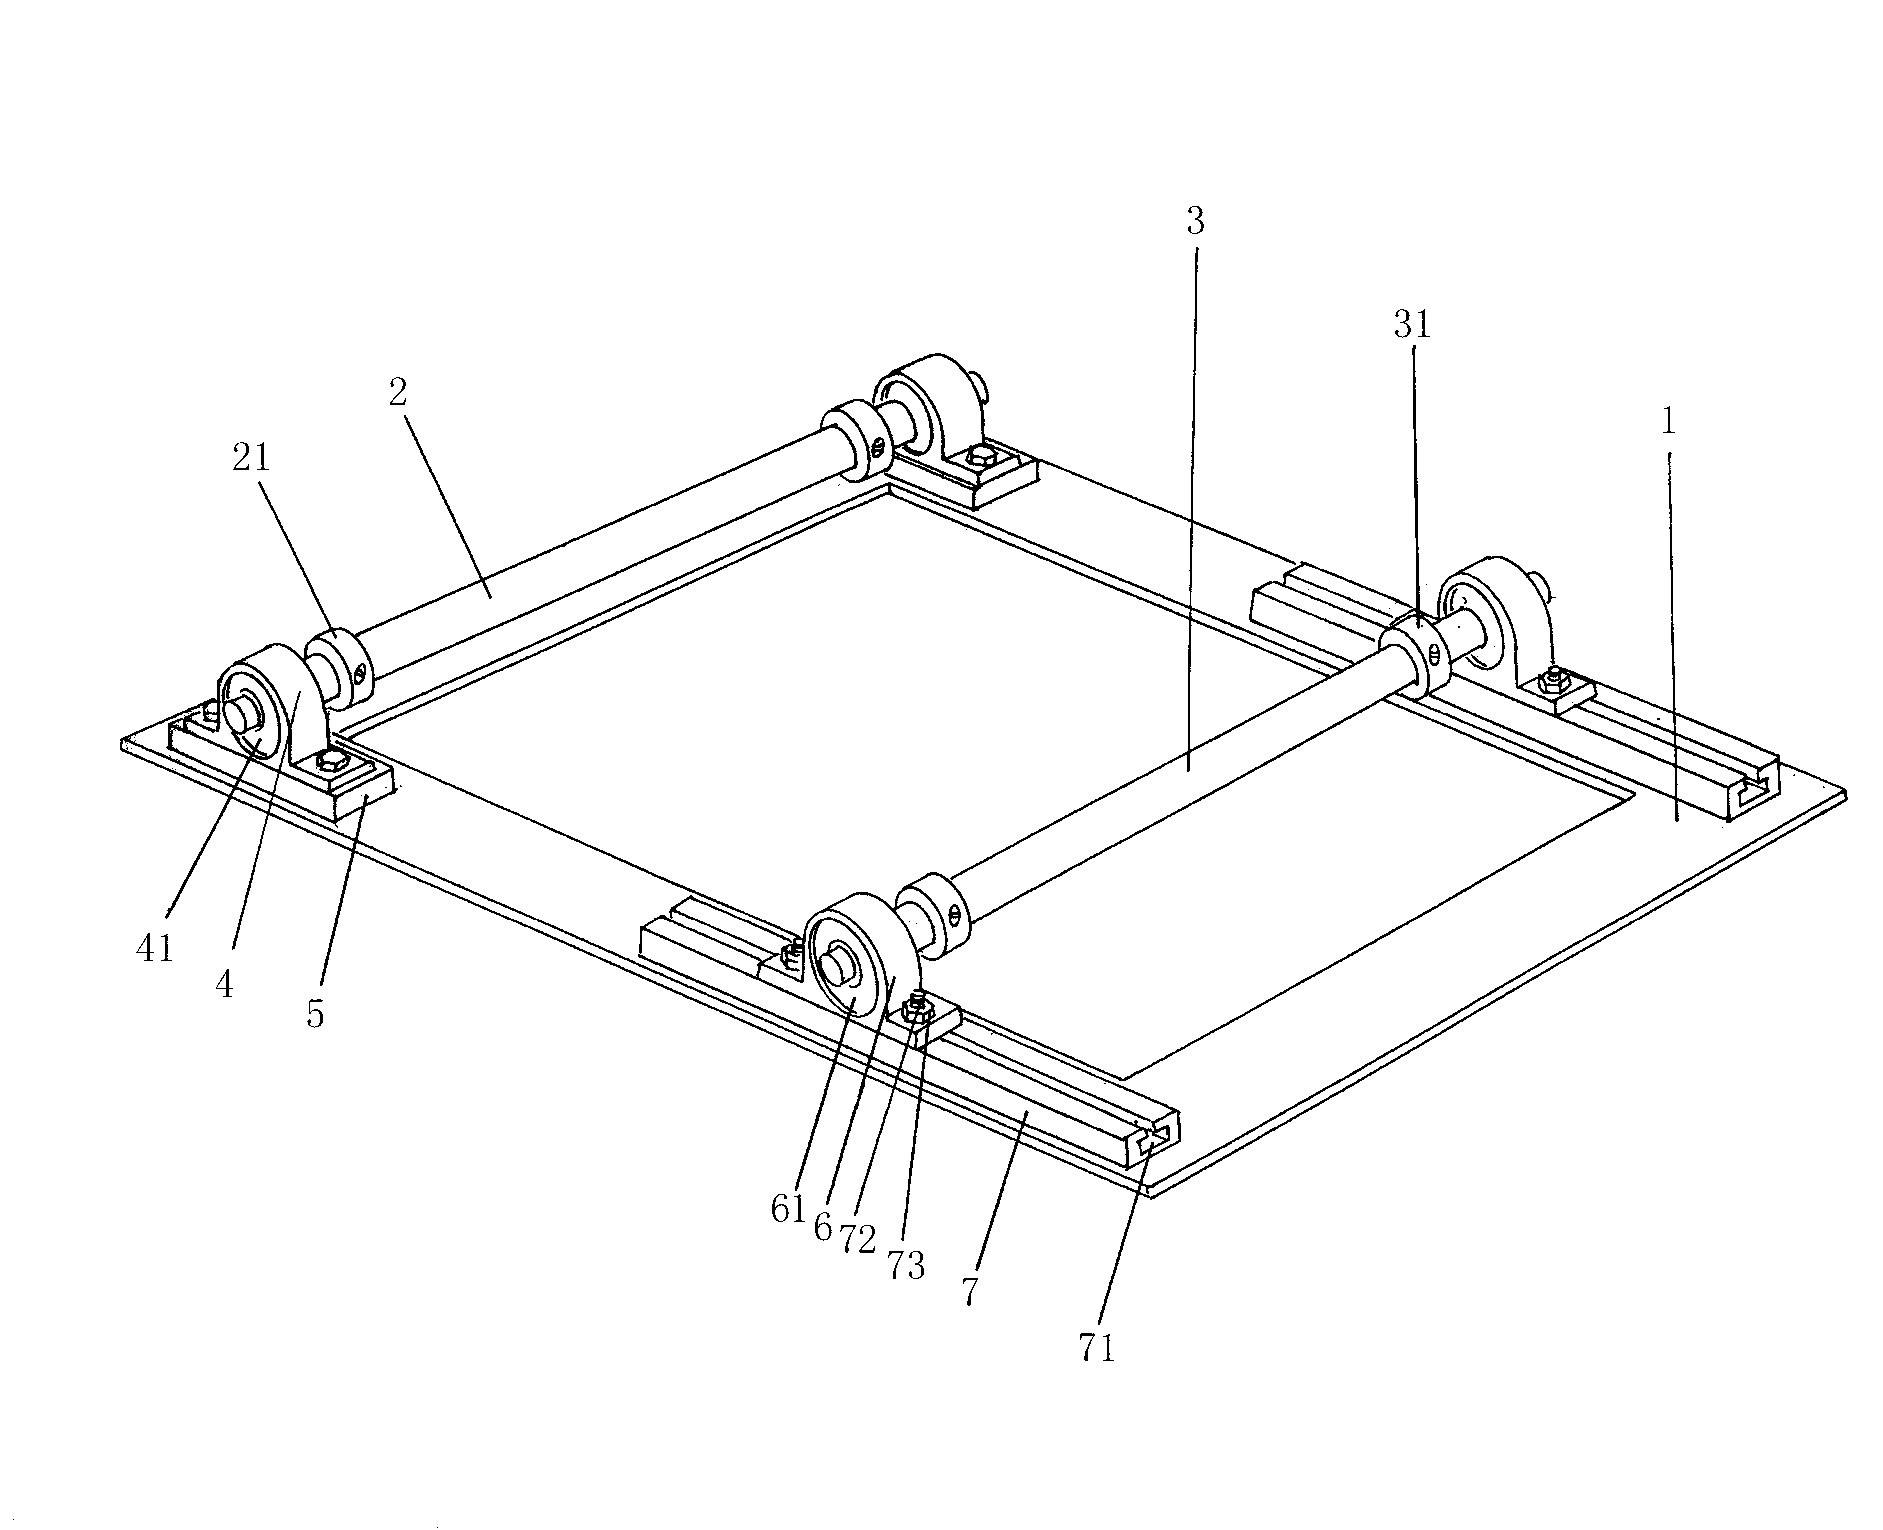 Active pay-off device for knitting machine